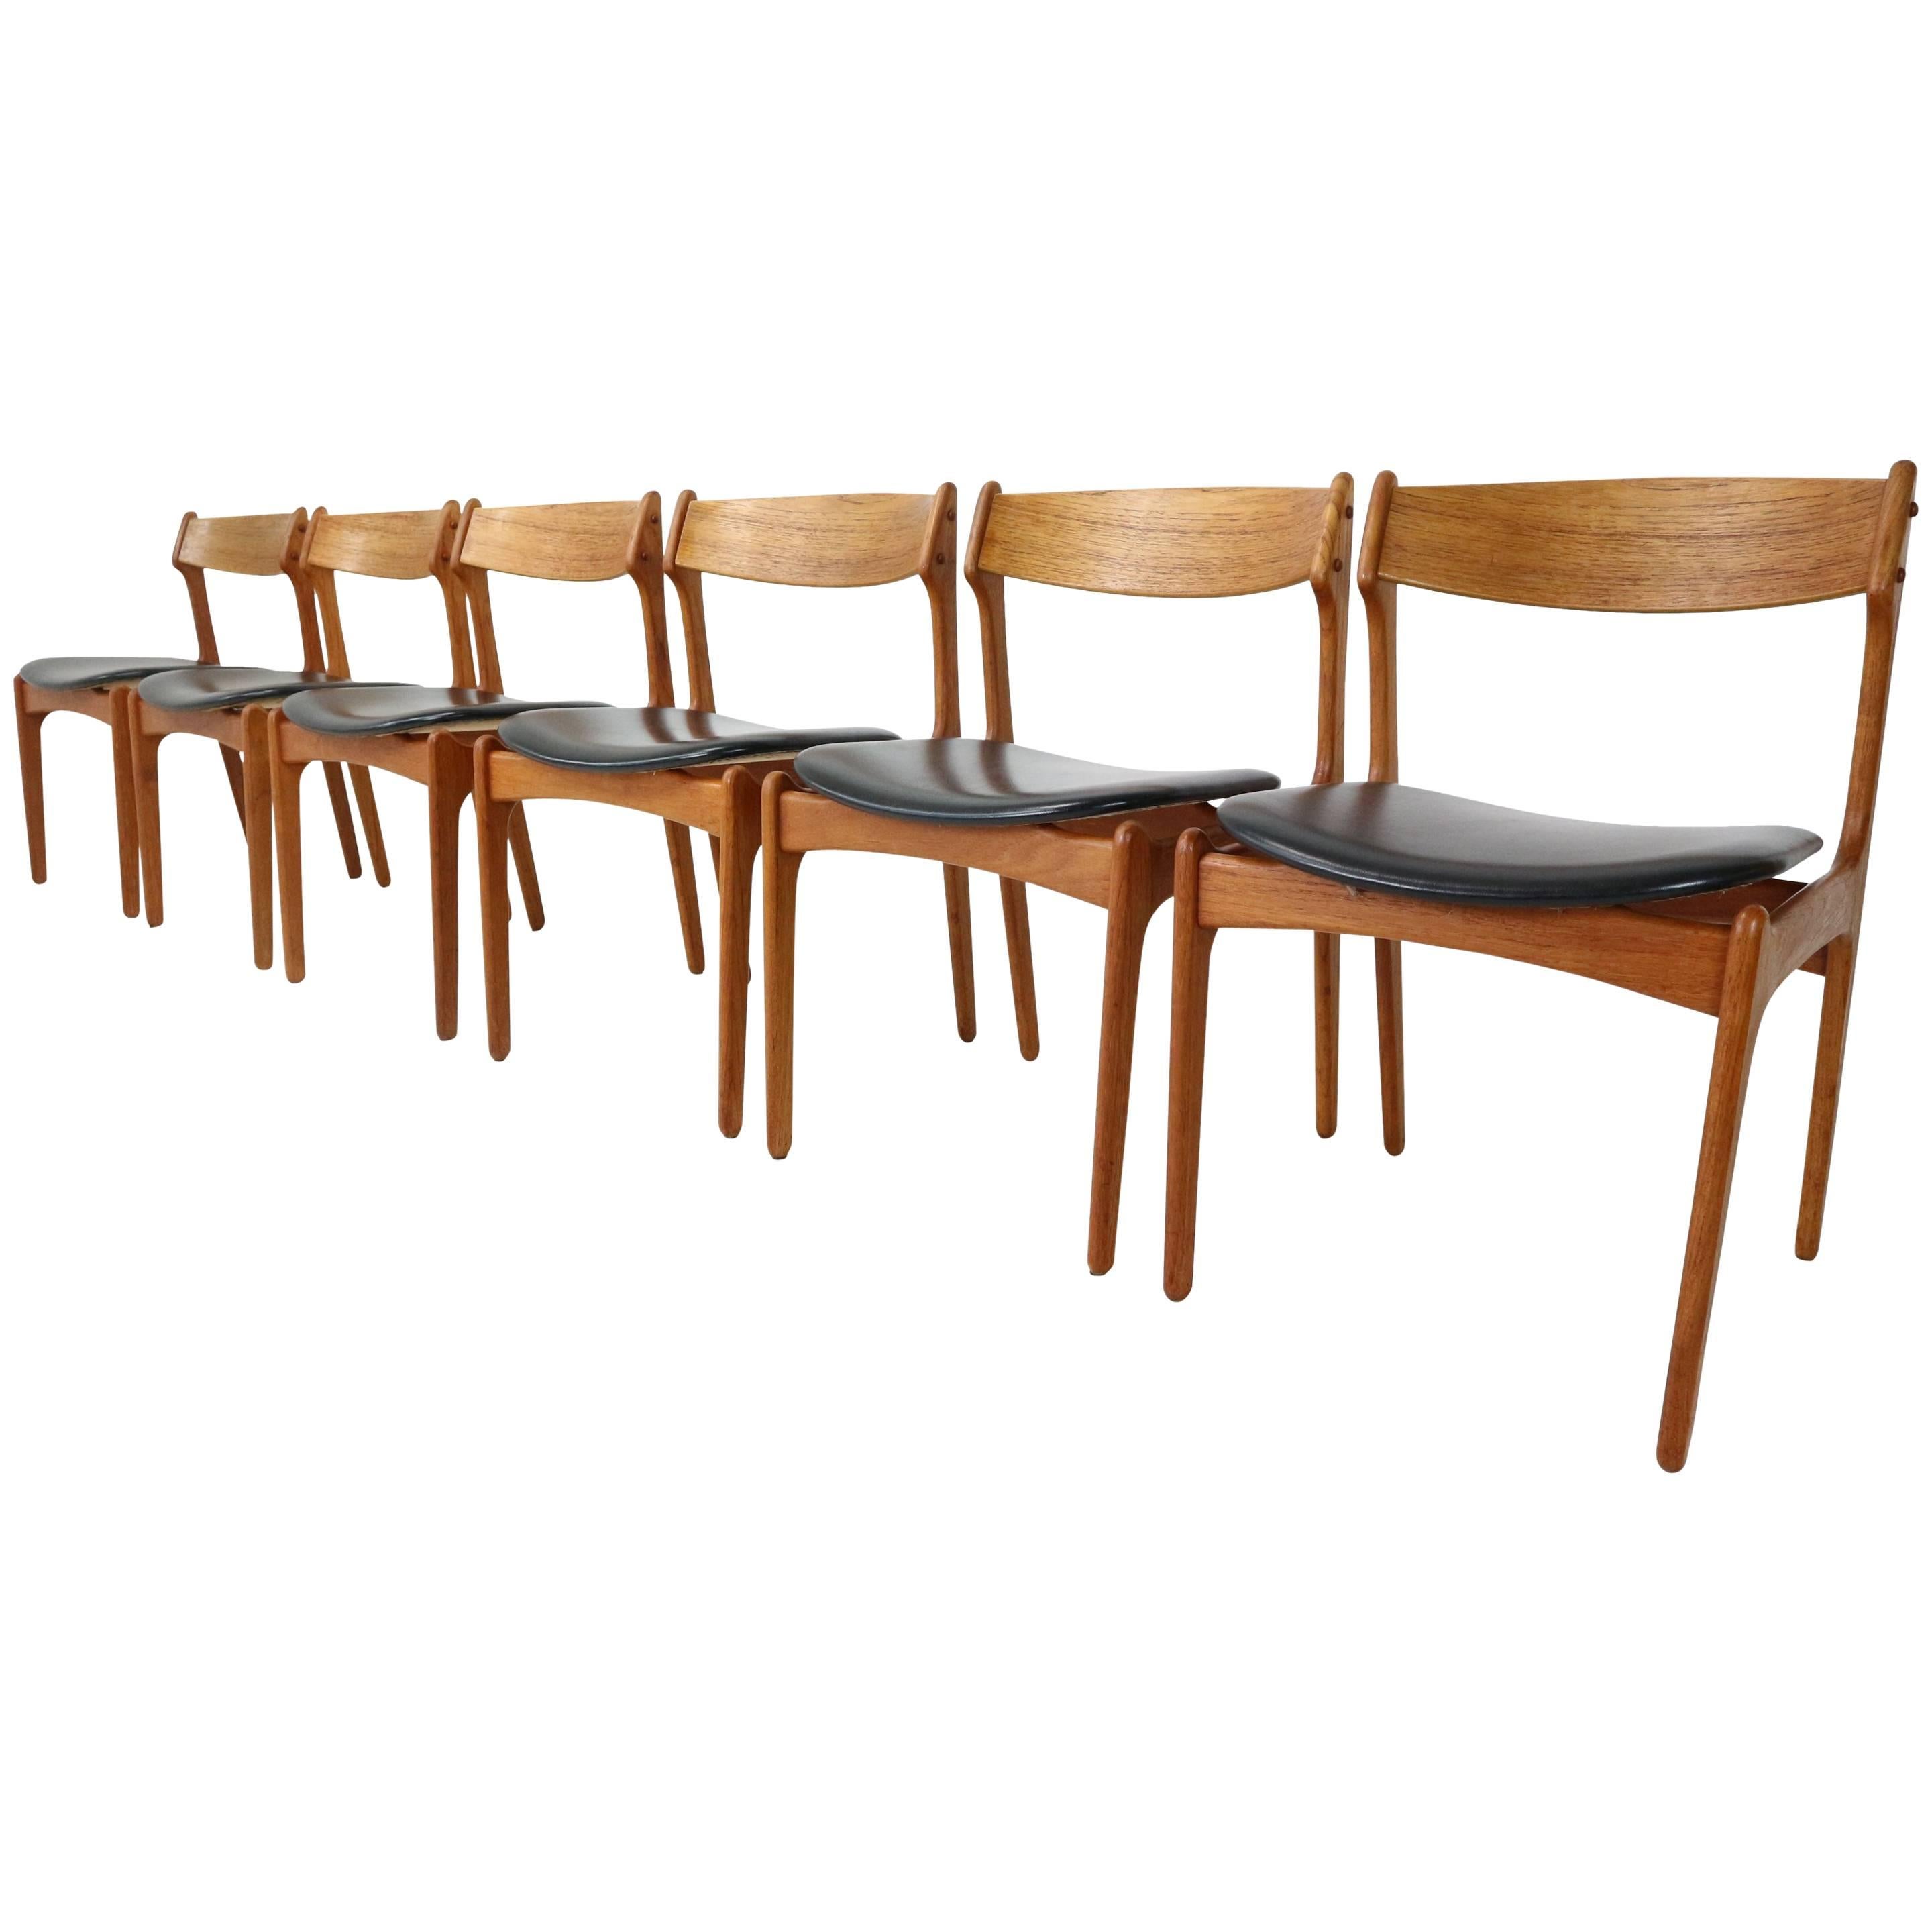 Set of Six Danish Teak Dining Chairs Designed by Erik Buch for O.D